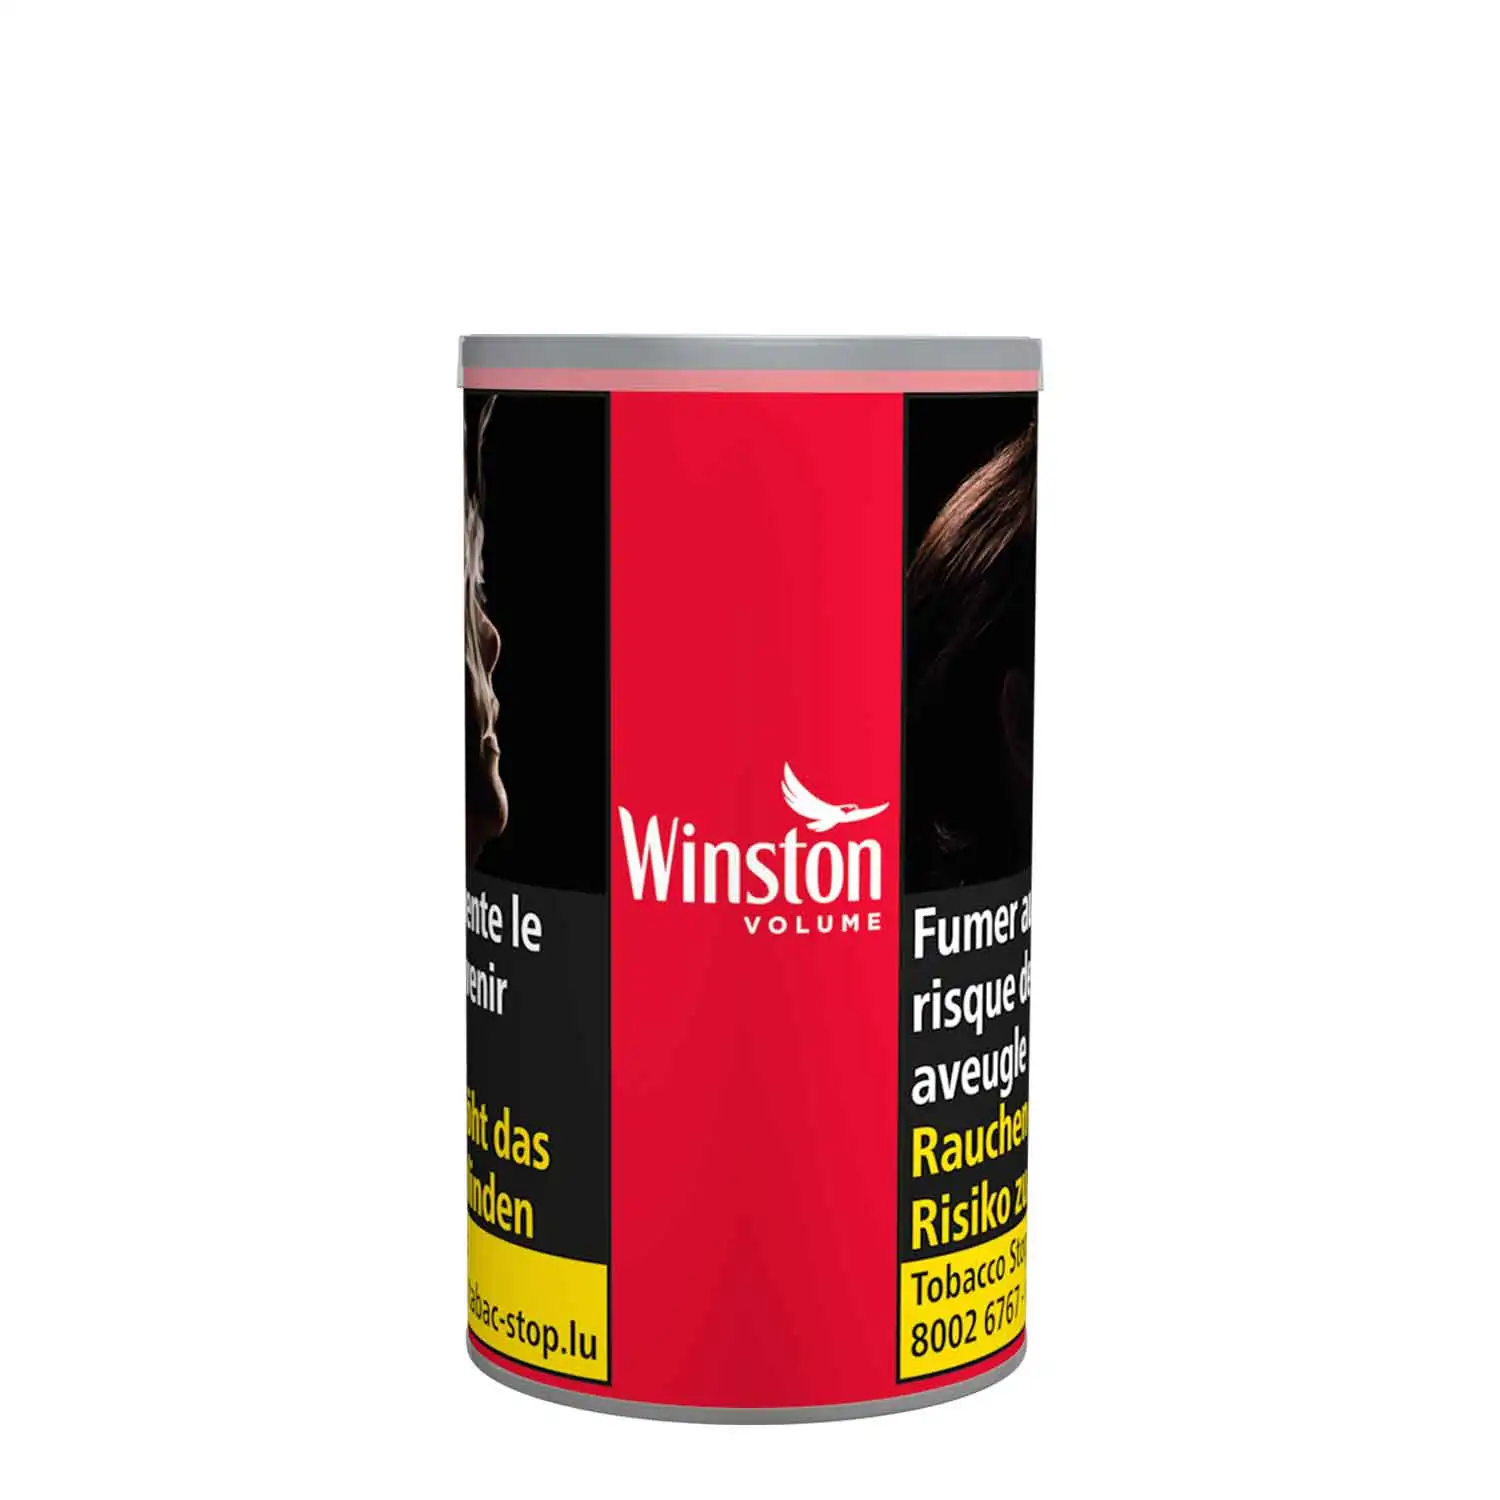 Winston volume rouge 100g - Buy at Real Tobacco